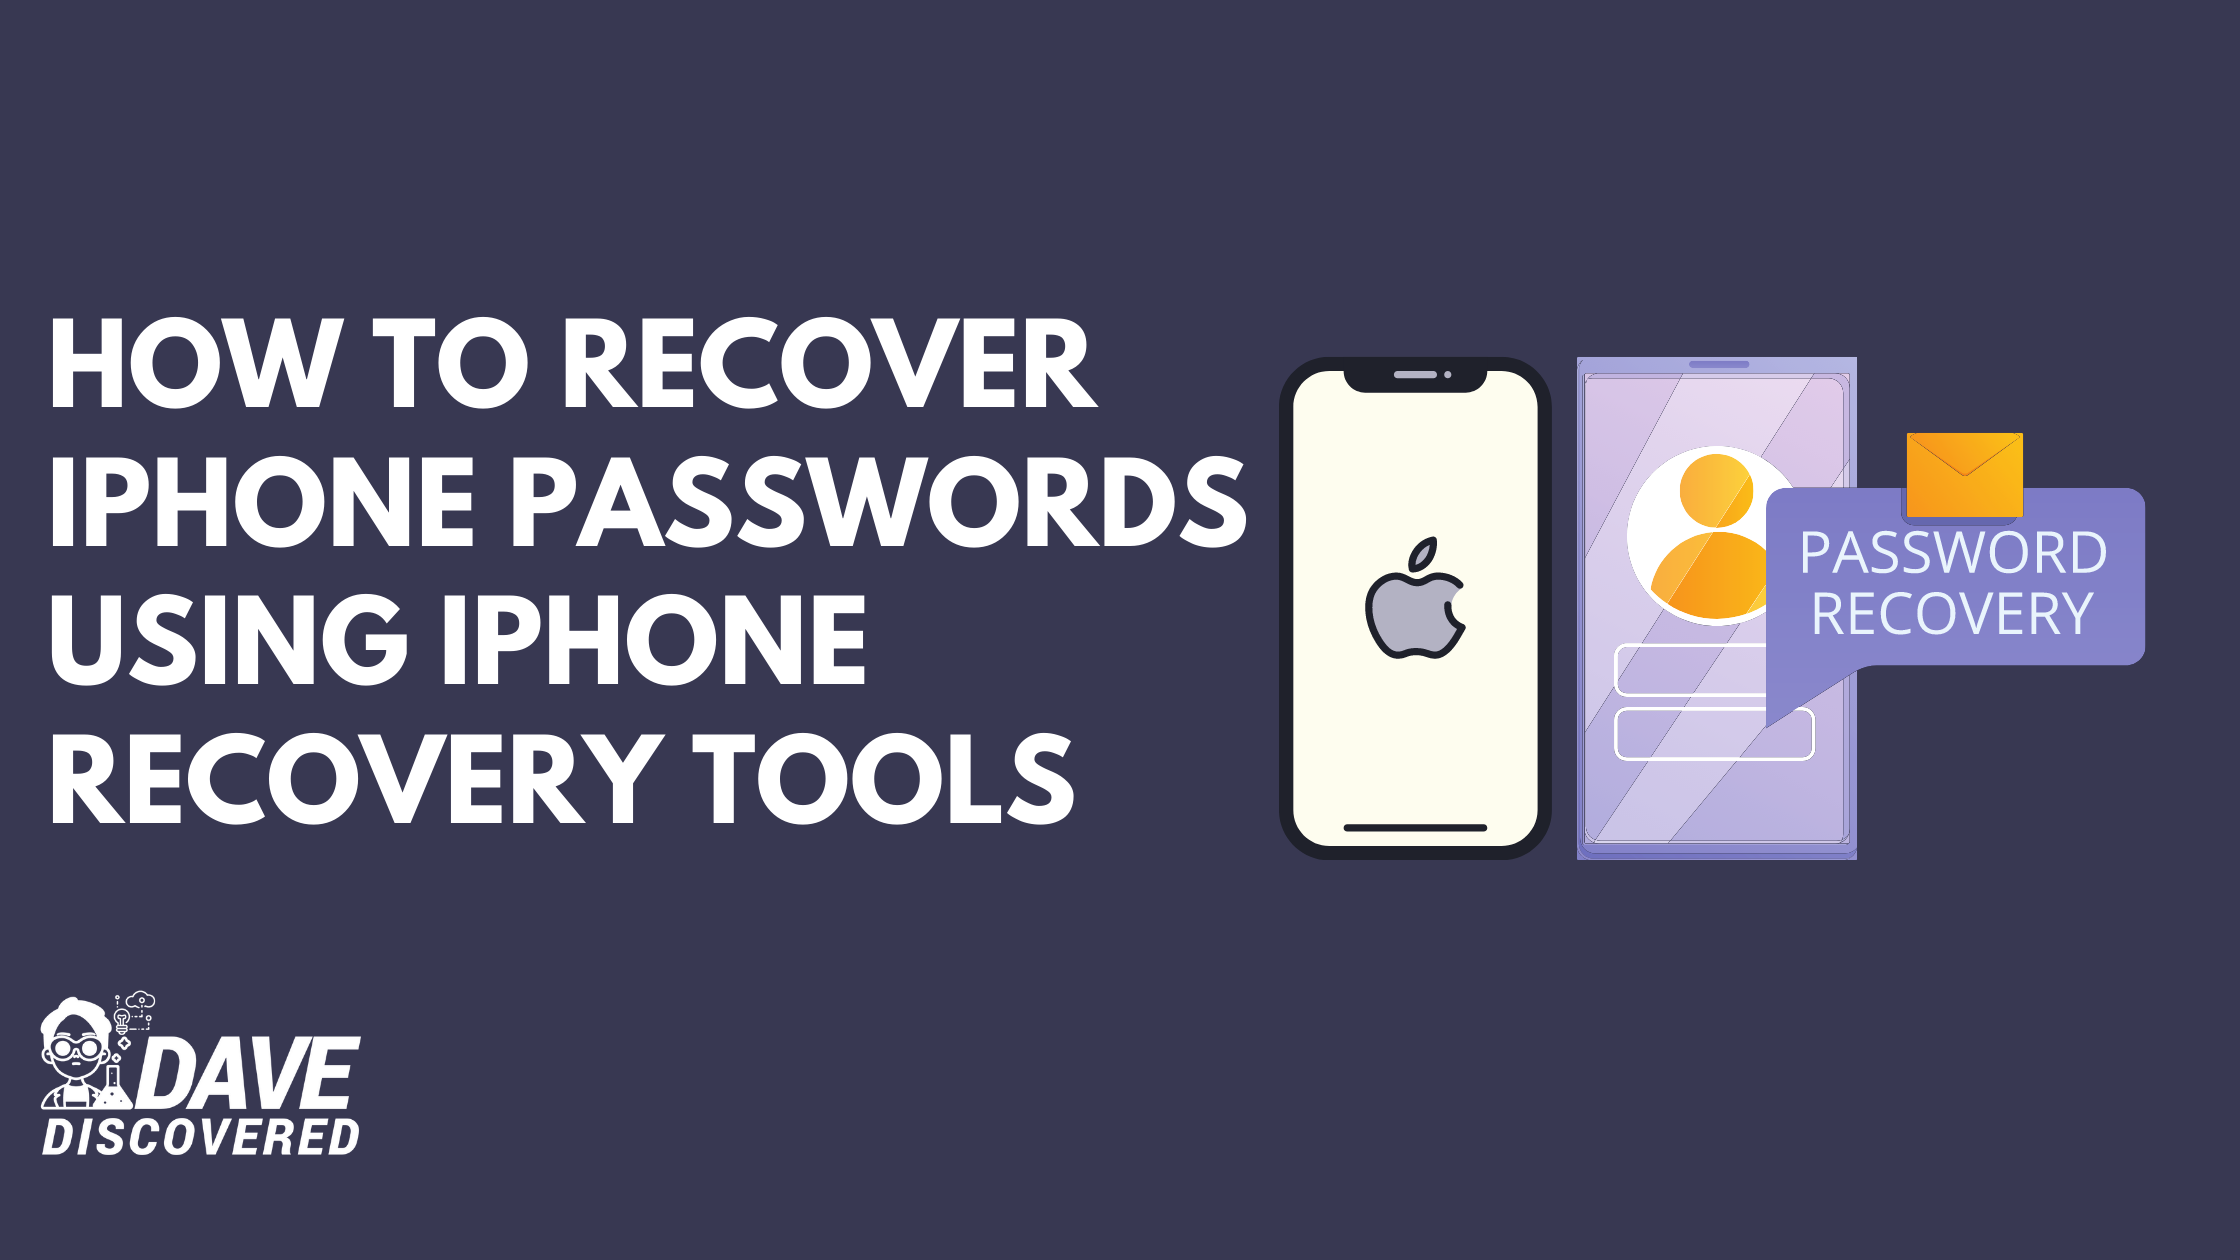 Recover iPhone Passwords Using iPhone Recovery Tools